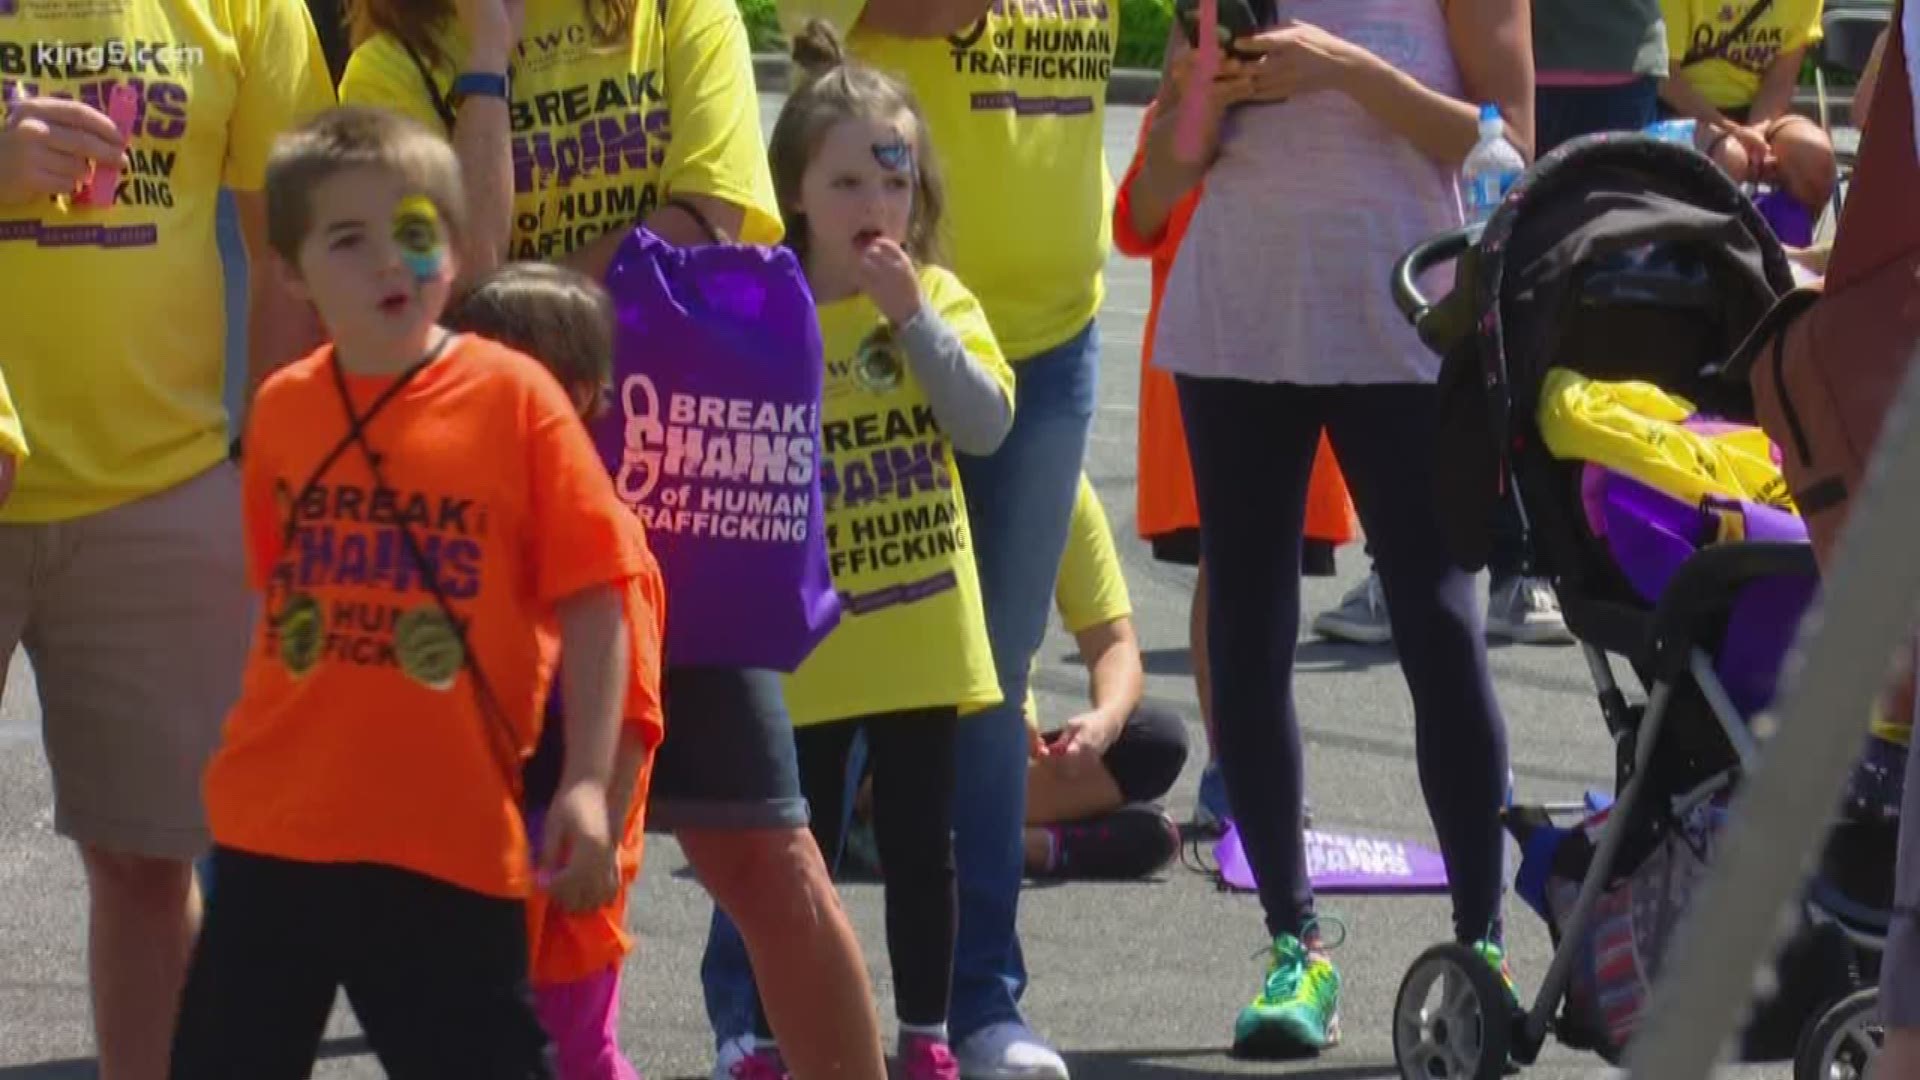 On a sunny Saturday in Federal Way more than 1,000 people took steps to shine light on an issue often kept in the dark.